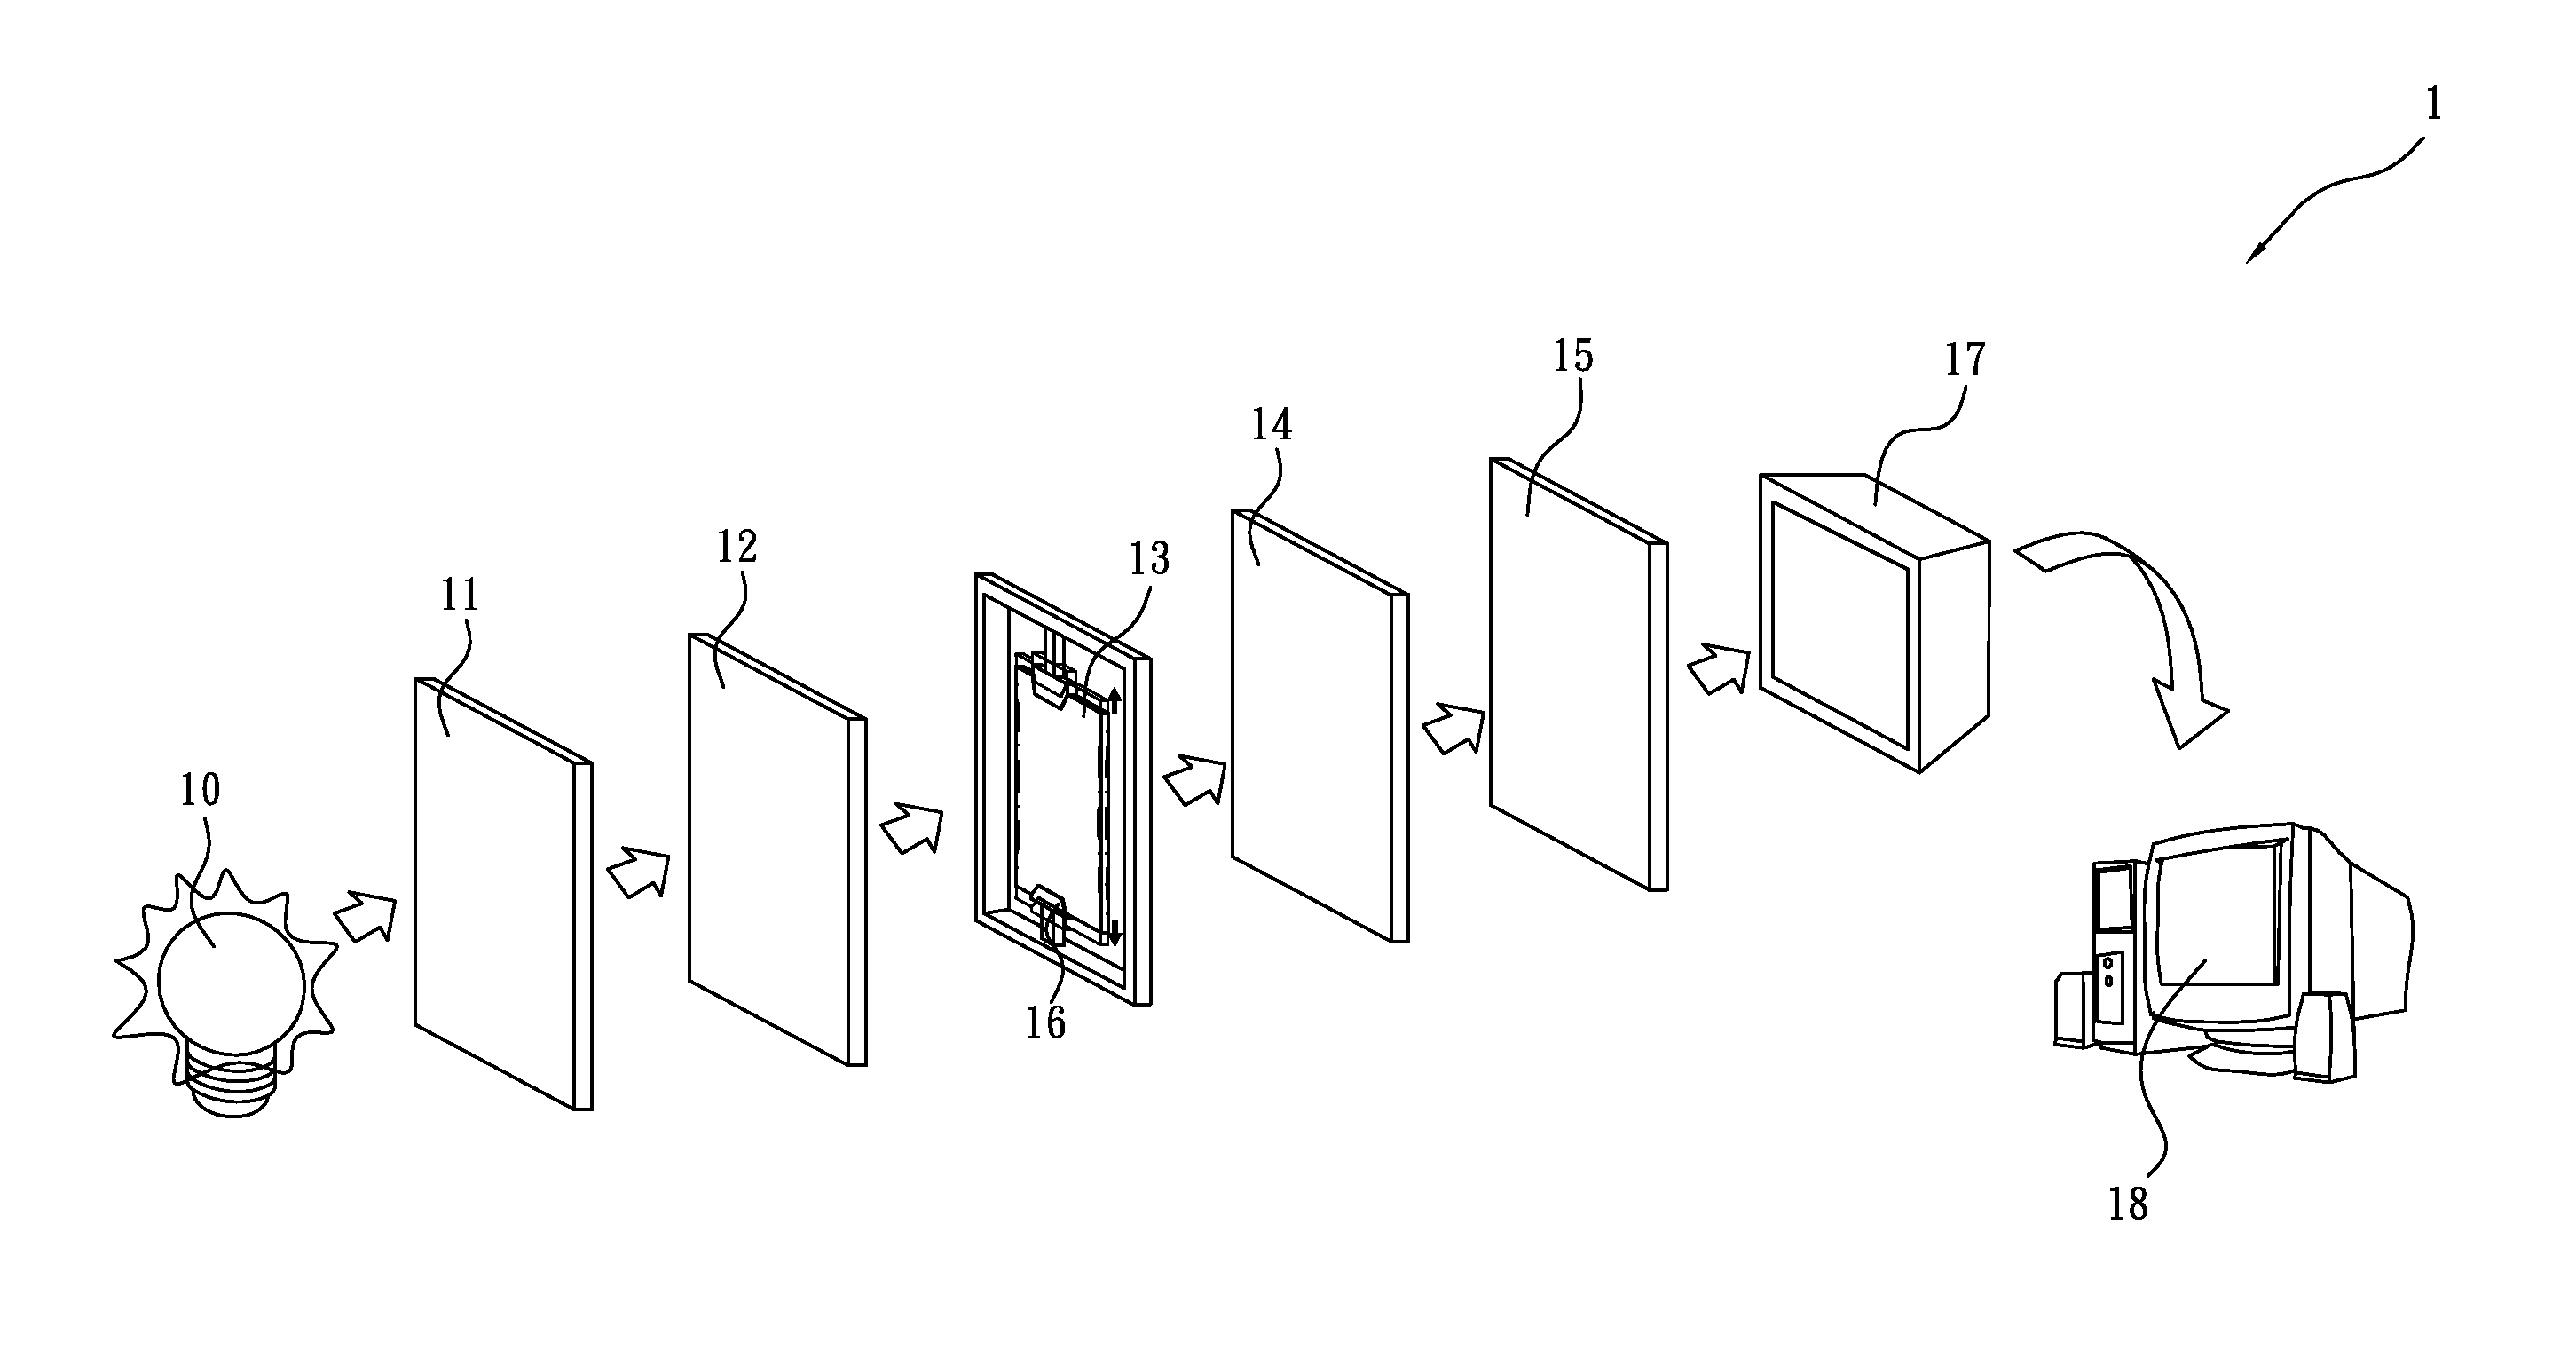 Apparatus for quantifying unknown stress and residual stress of a material and method thereof